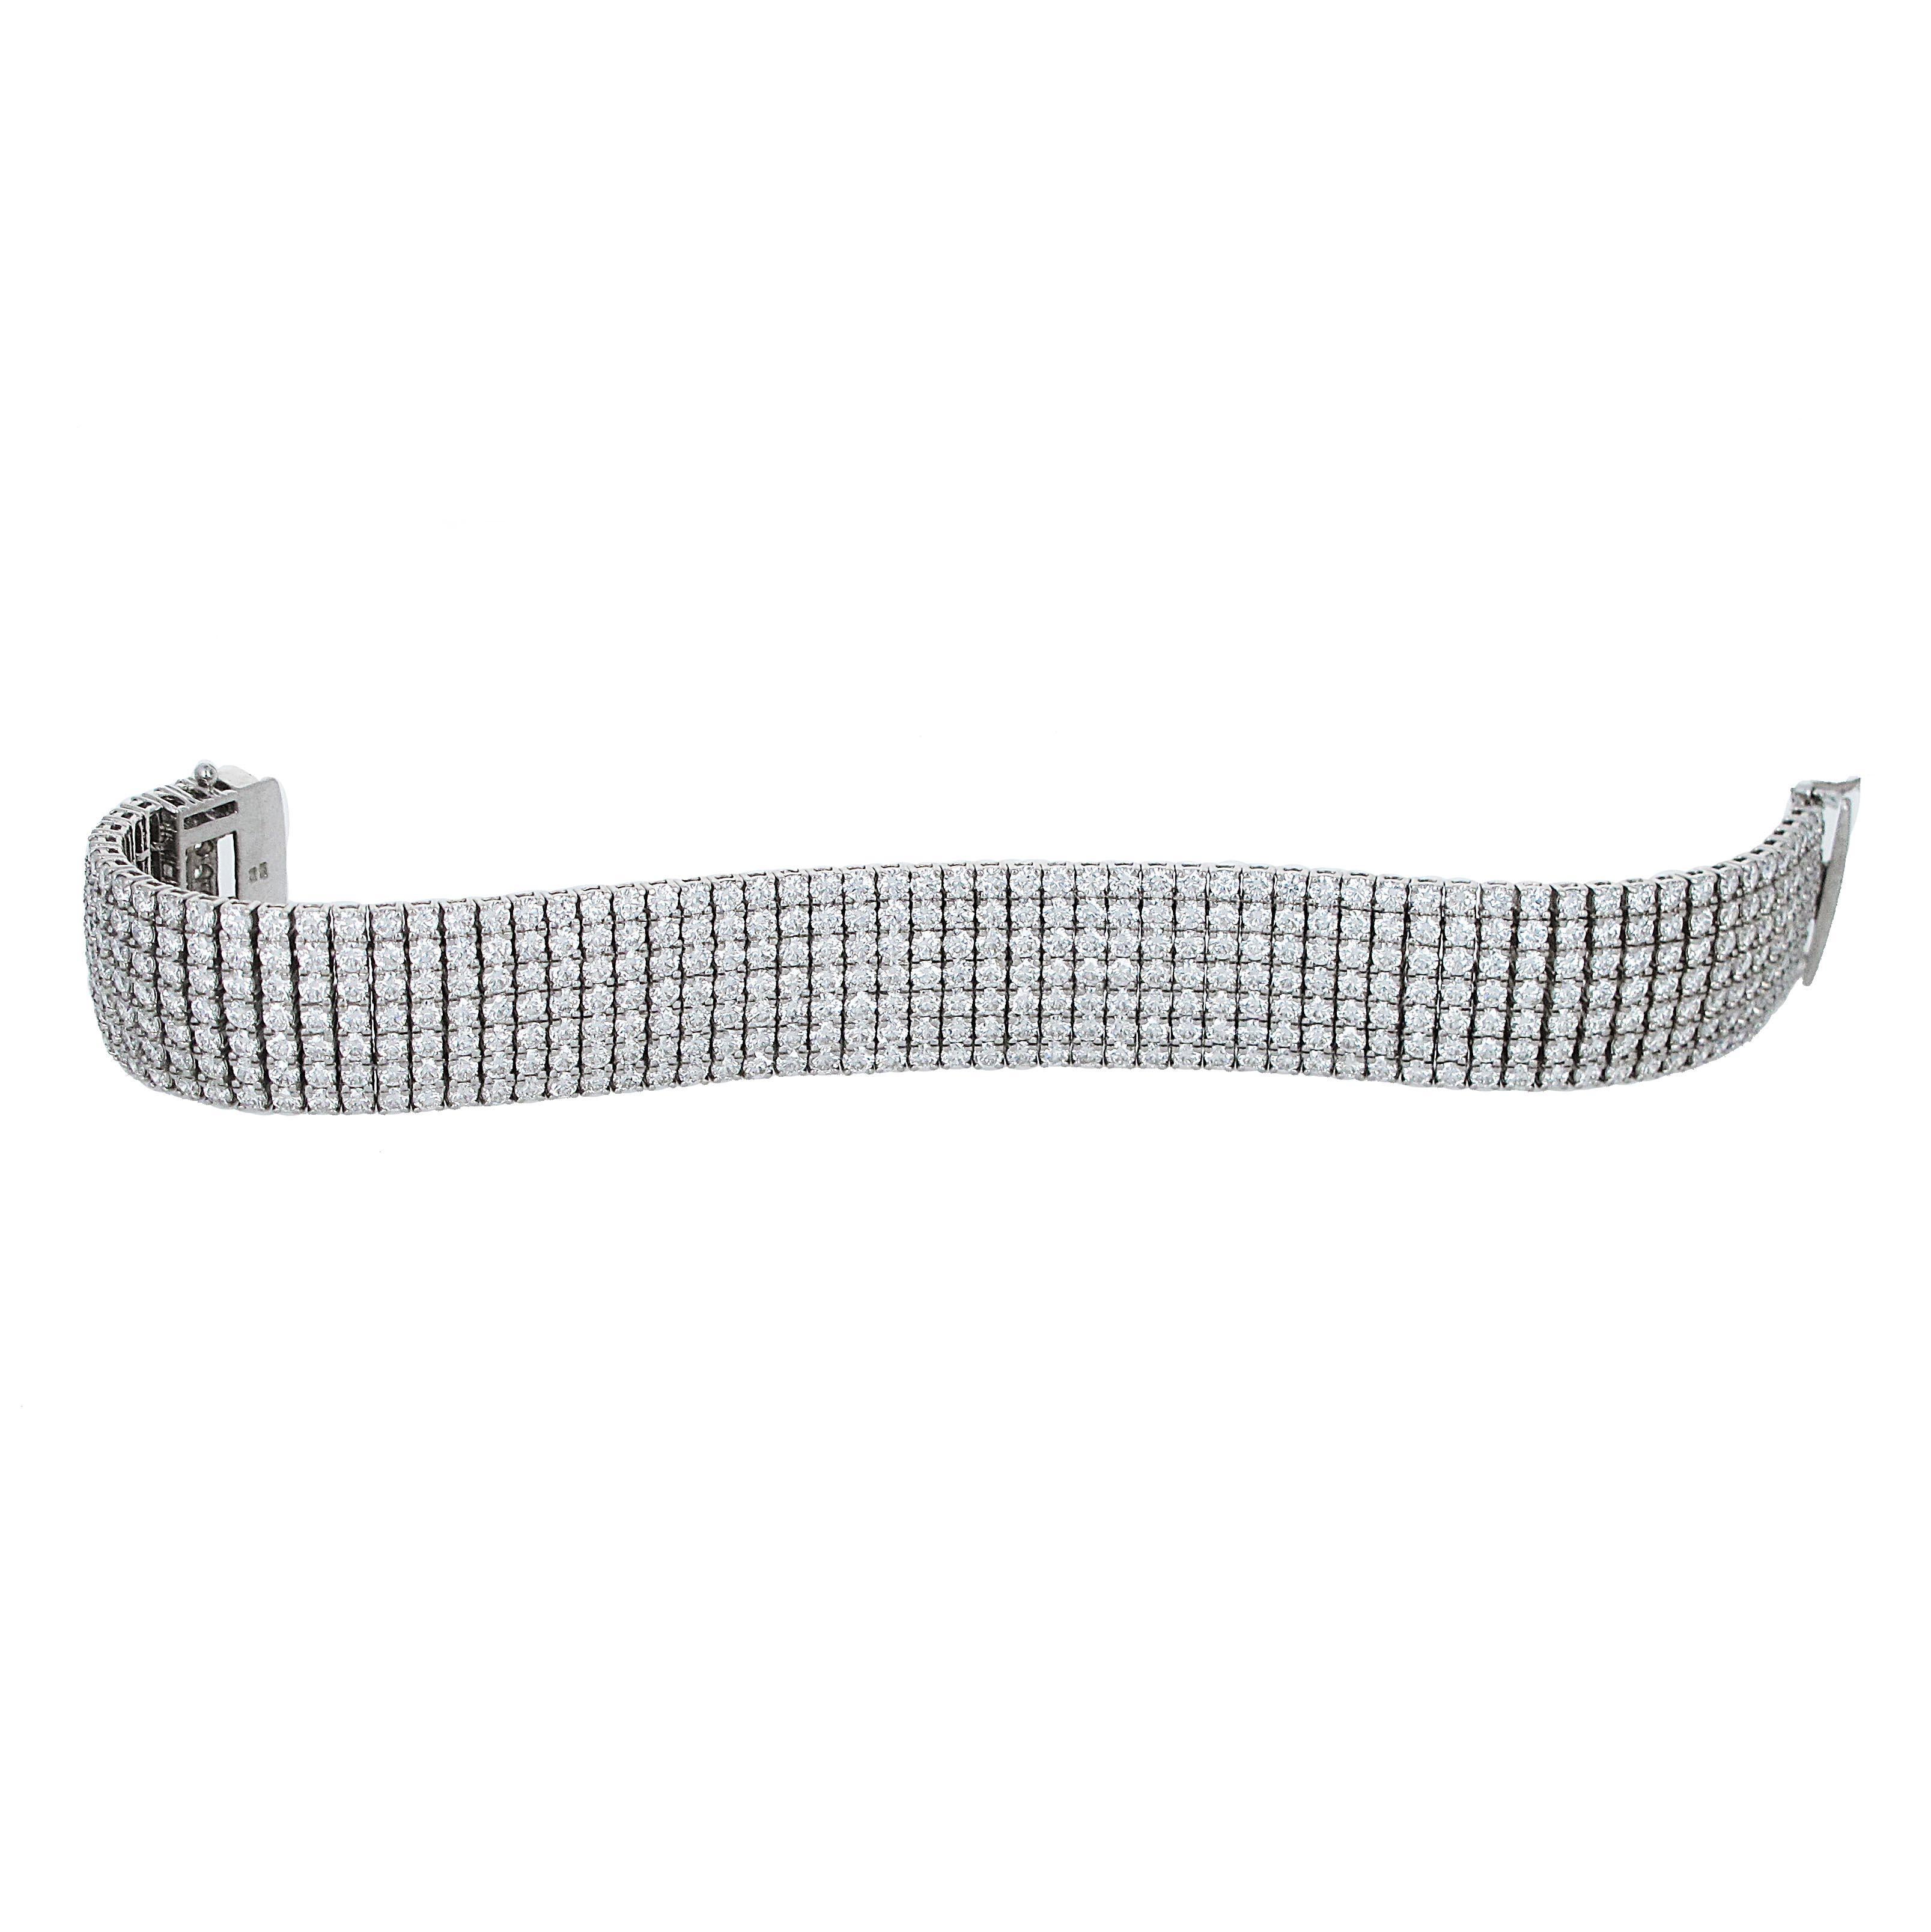 Super special well made bracelet. Over 23 carats of fine white diamonds. Count them, over 450 diamonds set in 18k white gold make this bracelet a showstopper. Comfortable enough to wear everyday, and still classy enough for a black tie event.